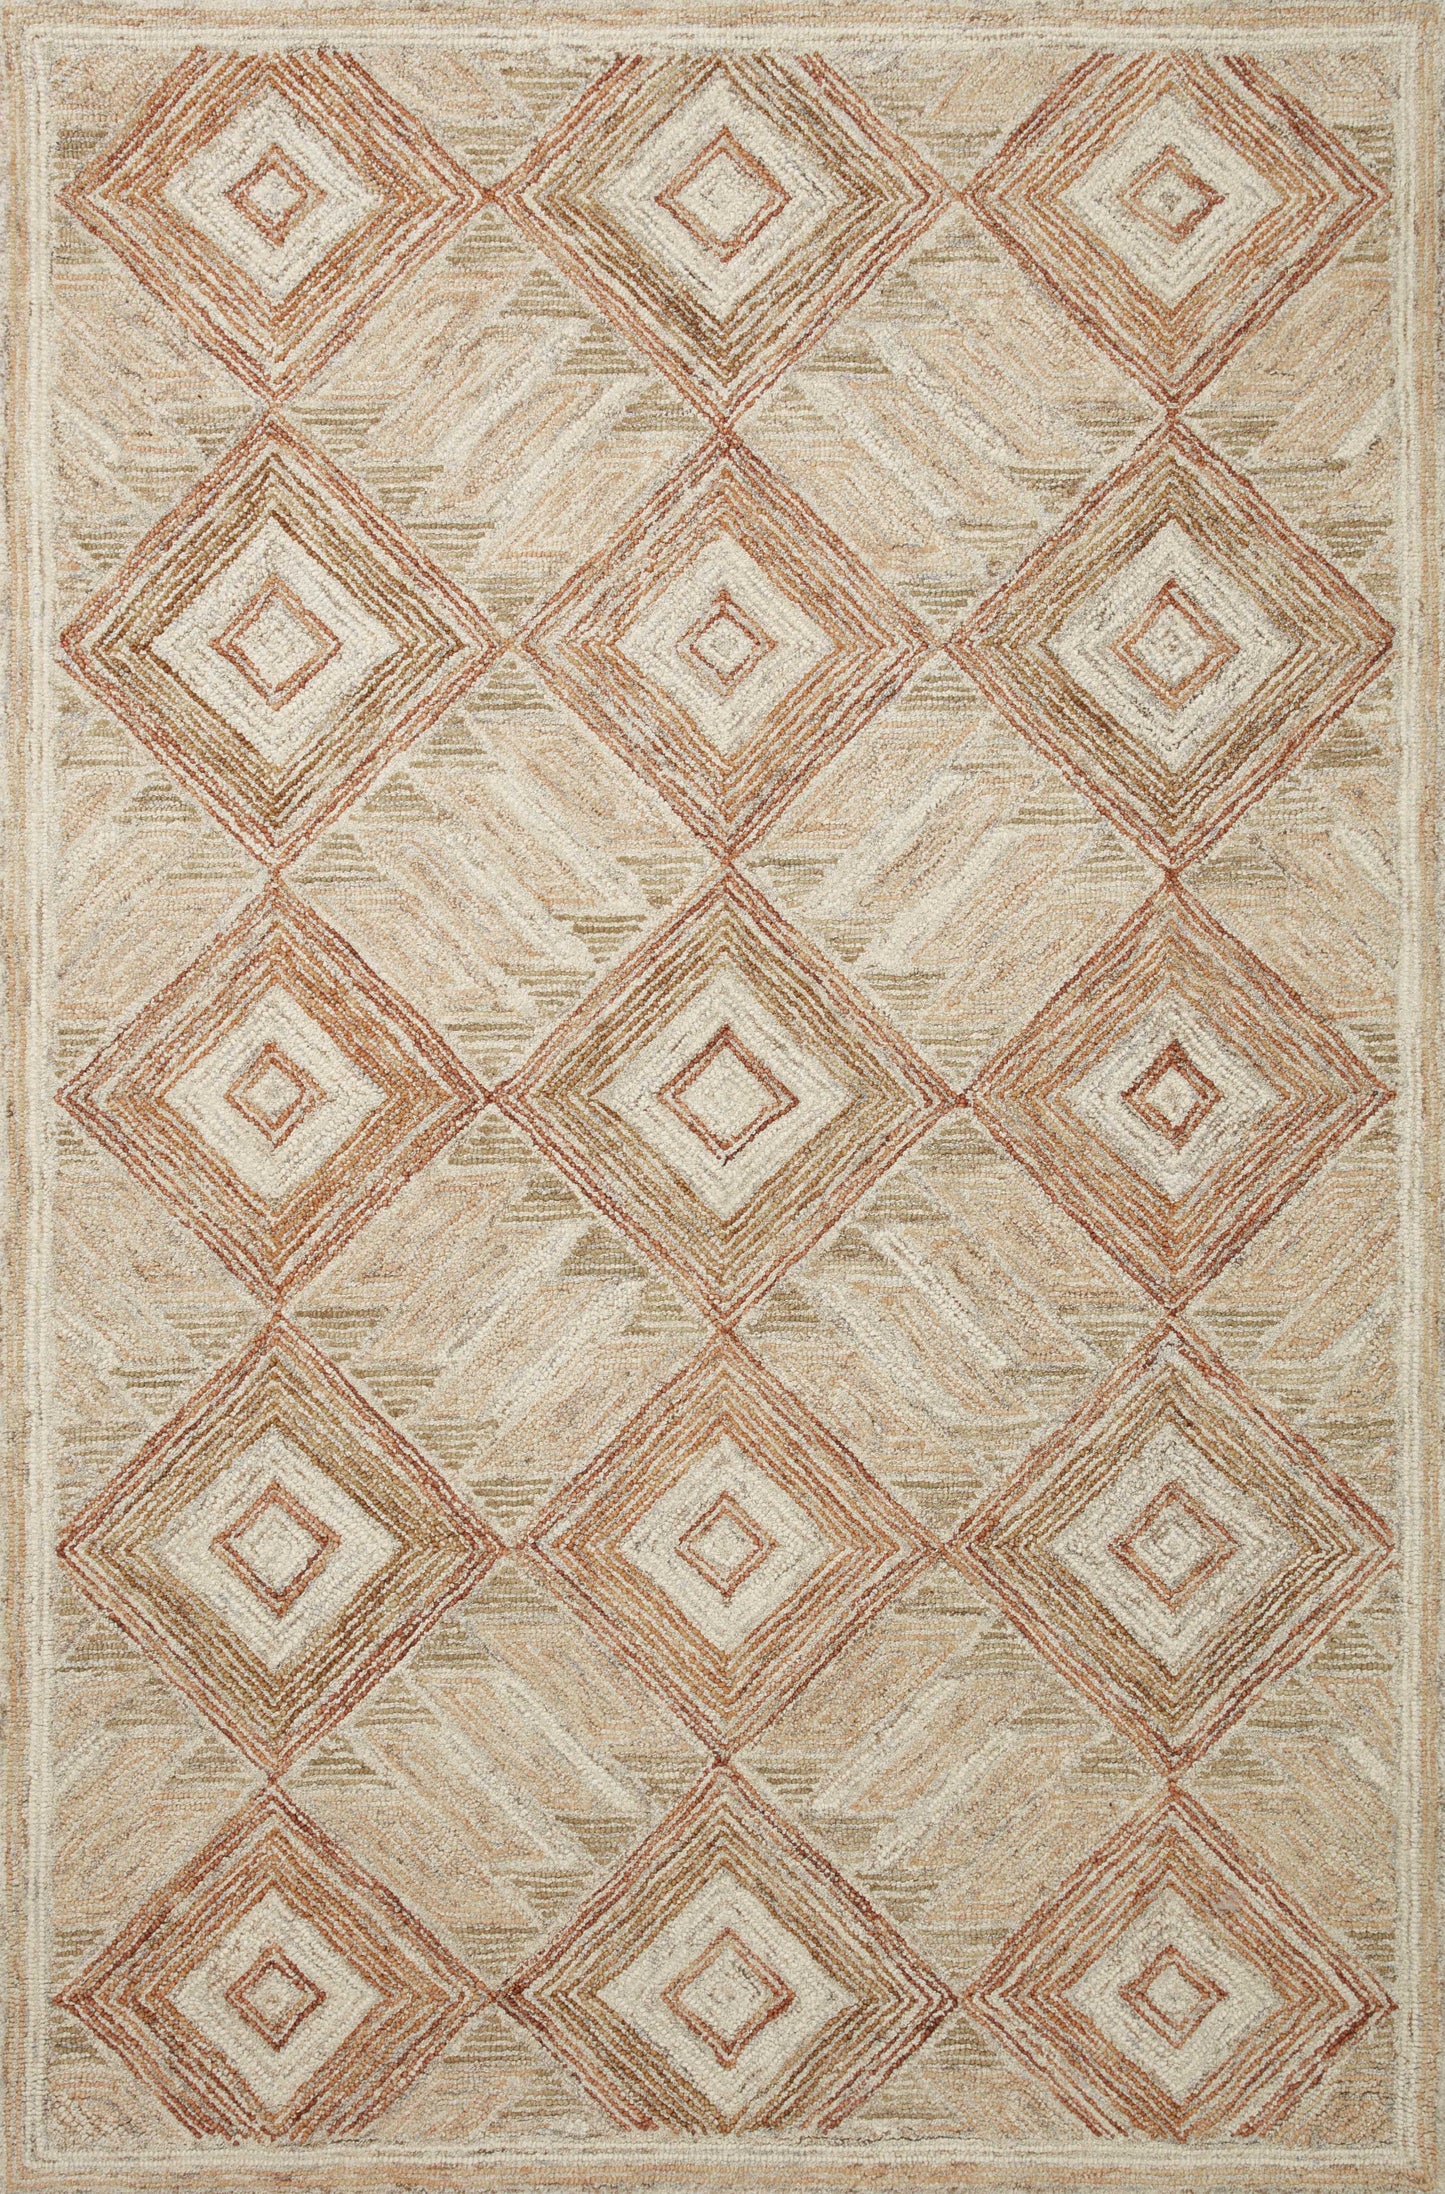 A picture of Loloi's Varena rug, in style VAR-01, color Sand / clay